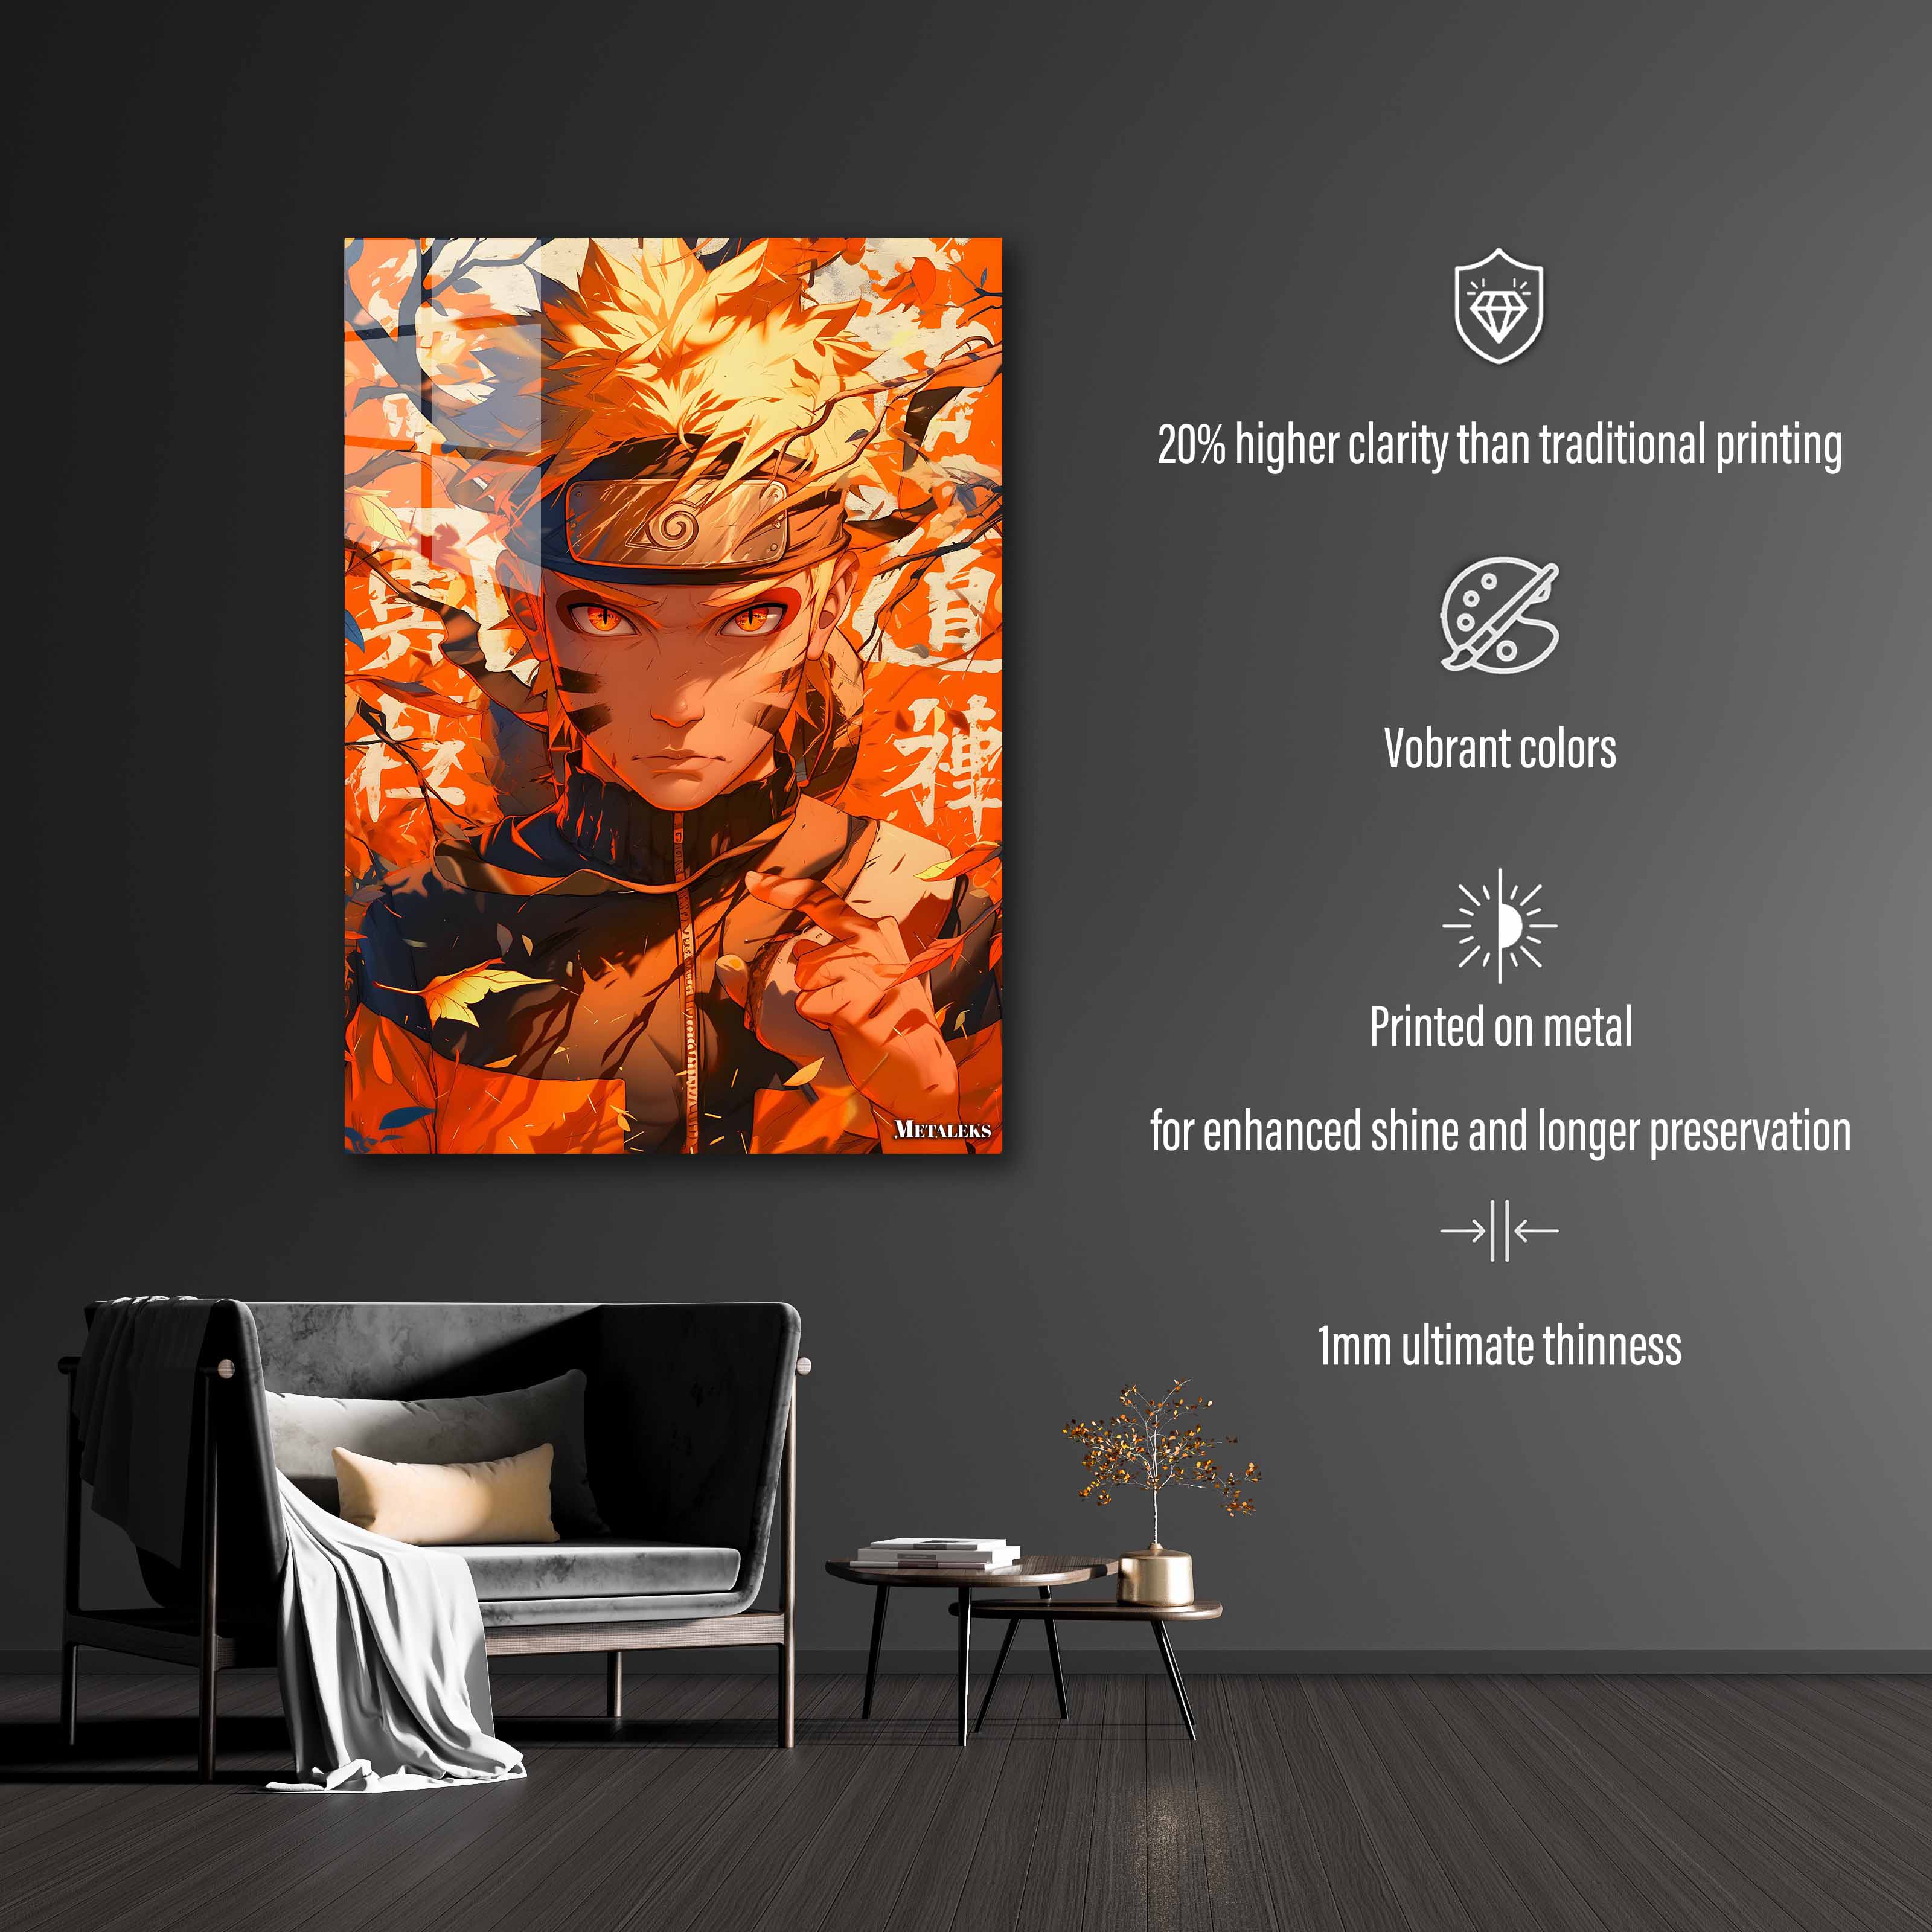 Naruto Poster-designed by @Minty Art